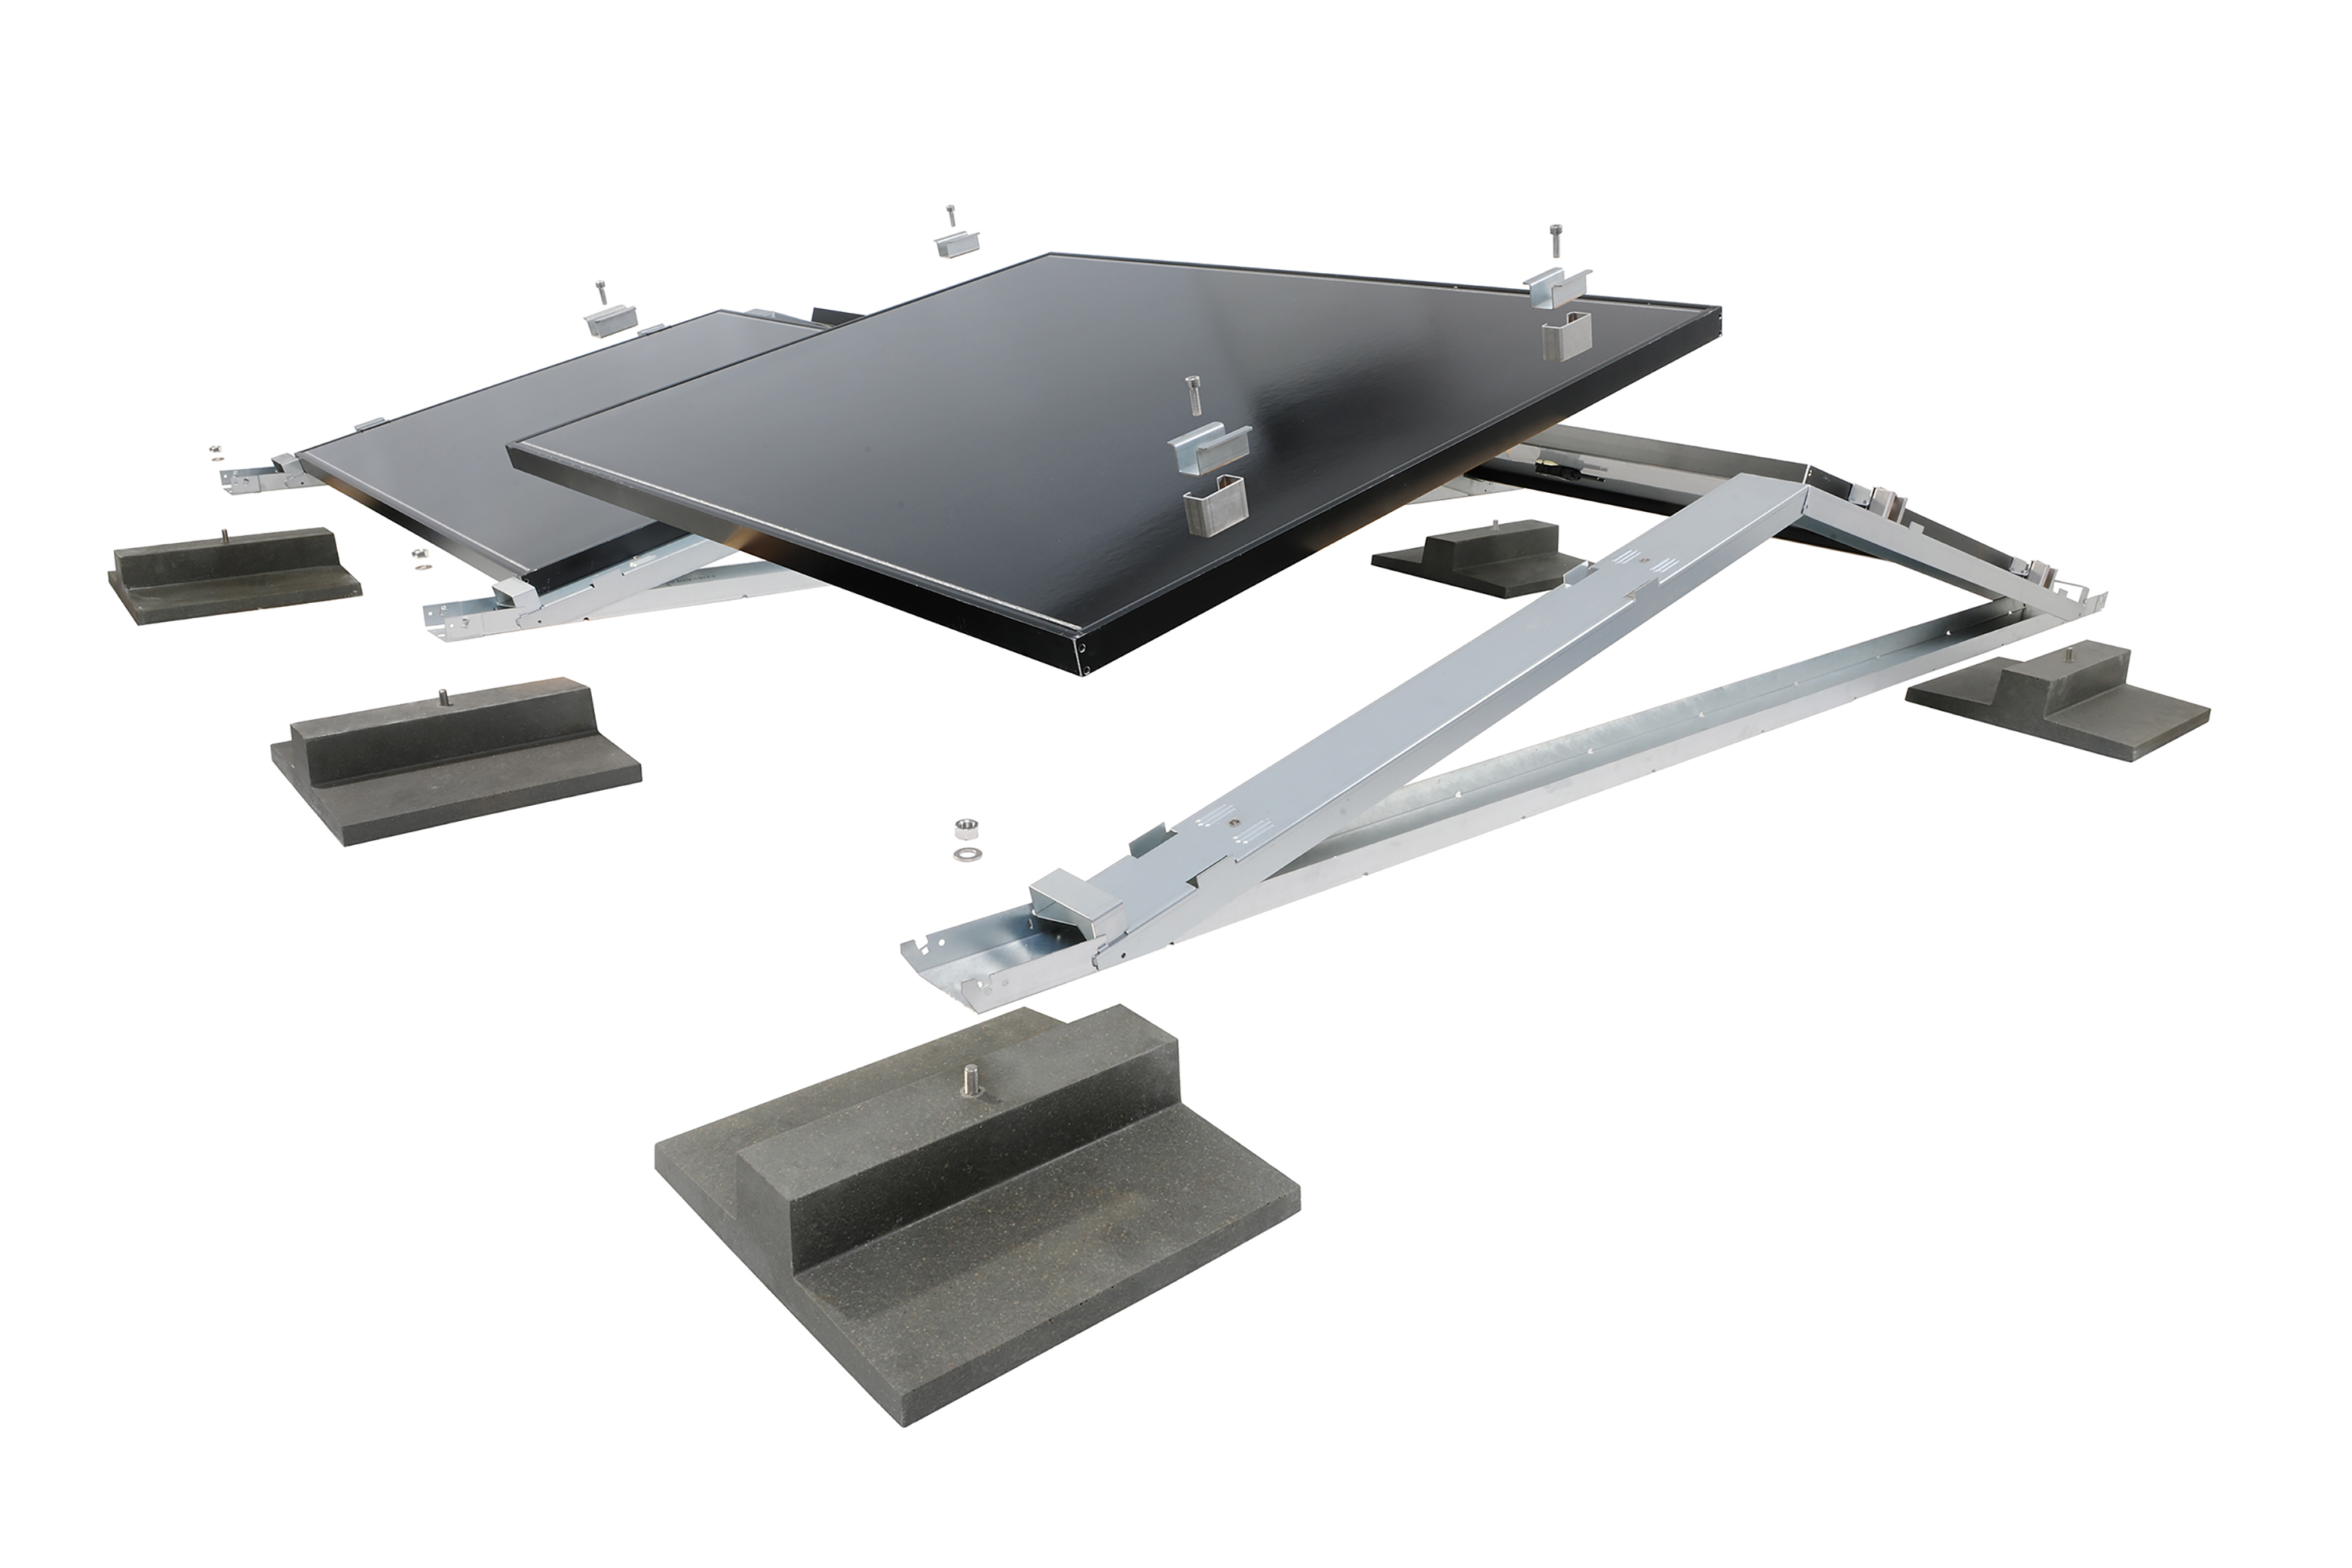 The MiraluxFlex is the latest addition to Richard Brink’s range of solar substructures. In the east-west facing version, the systems now come with module clamps to facilitate the flexible use of commercially available panels.